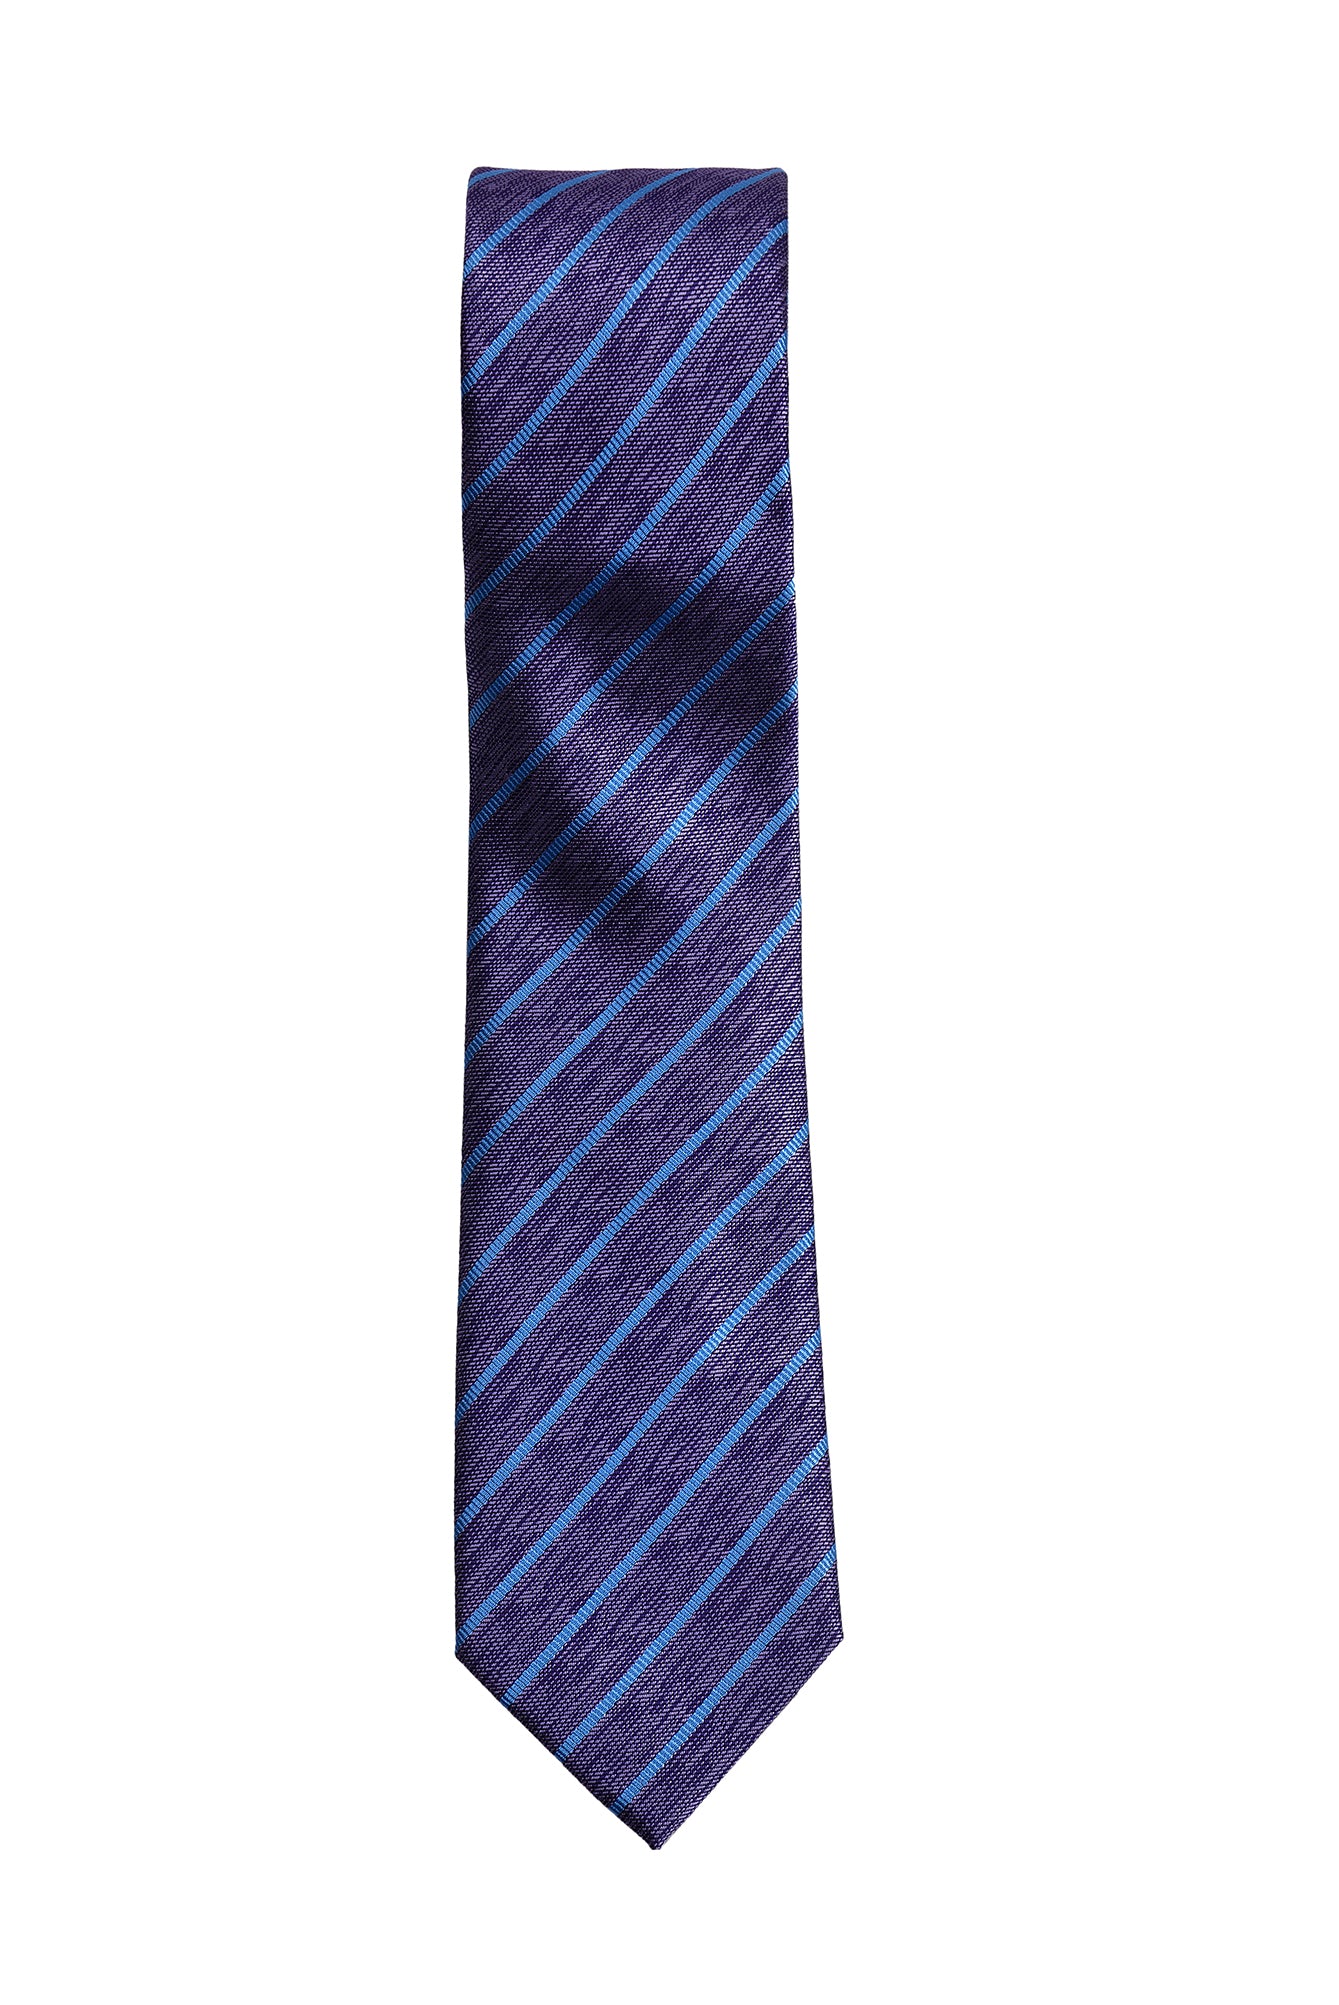 AST3216 POLYESTER WOVEN TIE